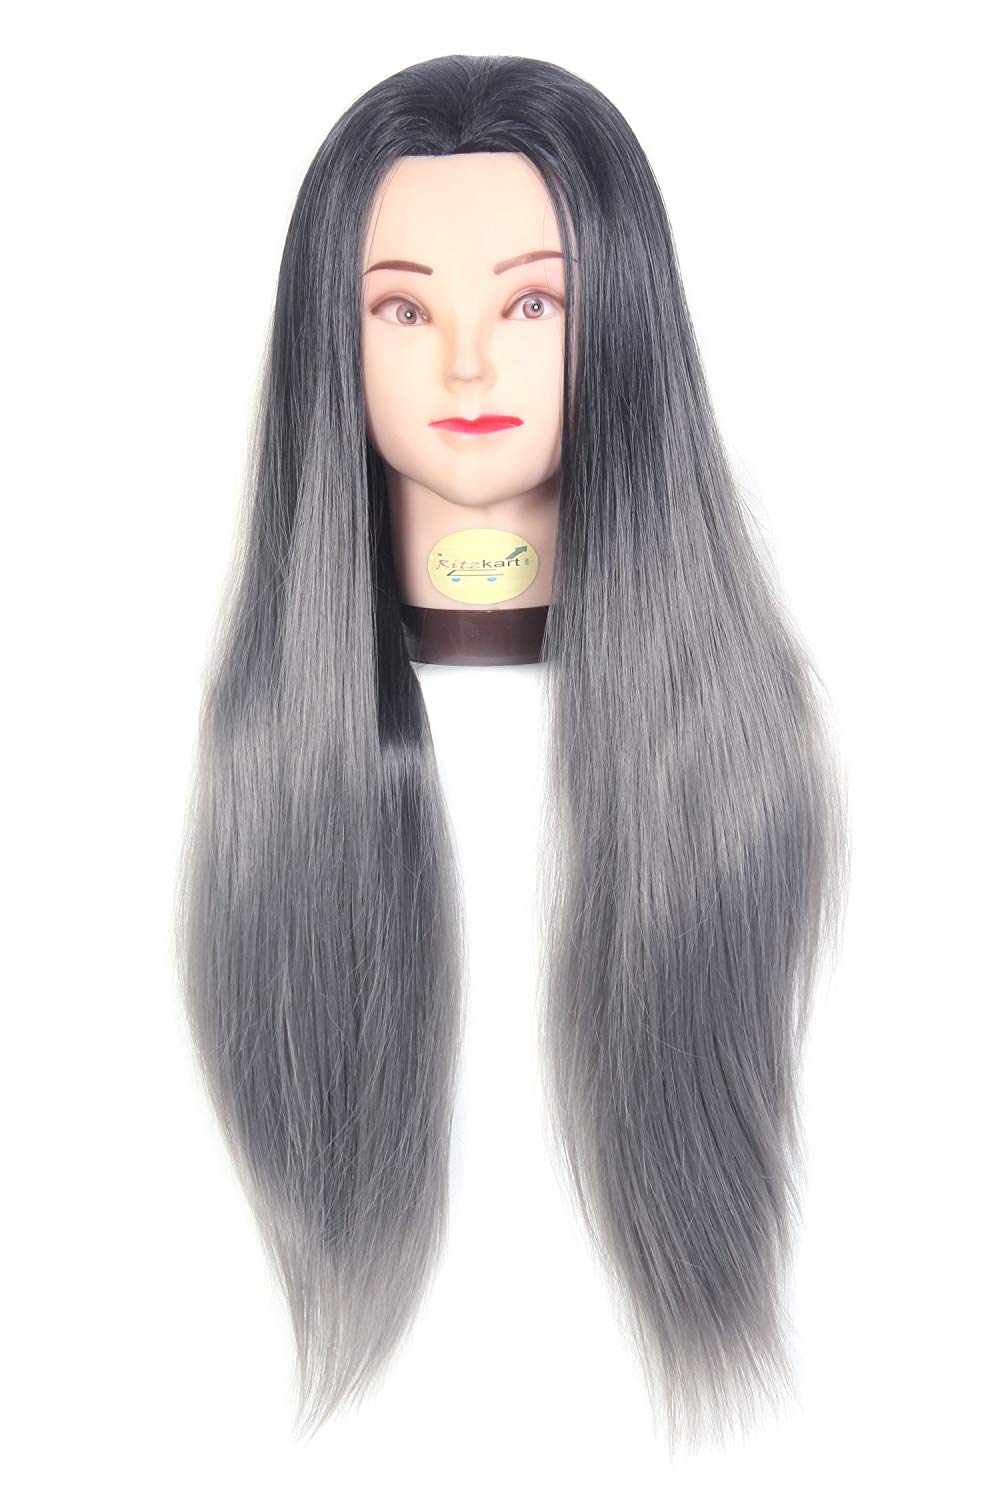 31 inch Long Synthetic Hair practice Feel Natural Black & Gray Mix Color Dummy for trainers